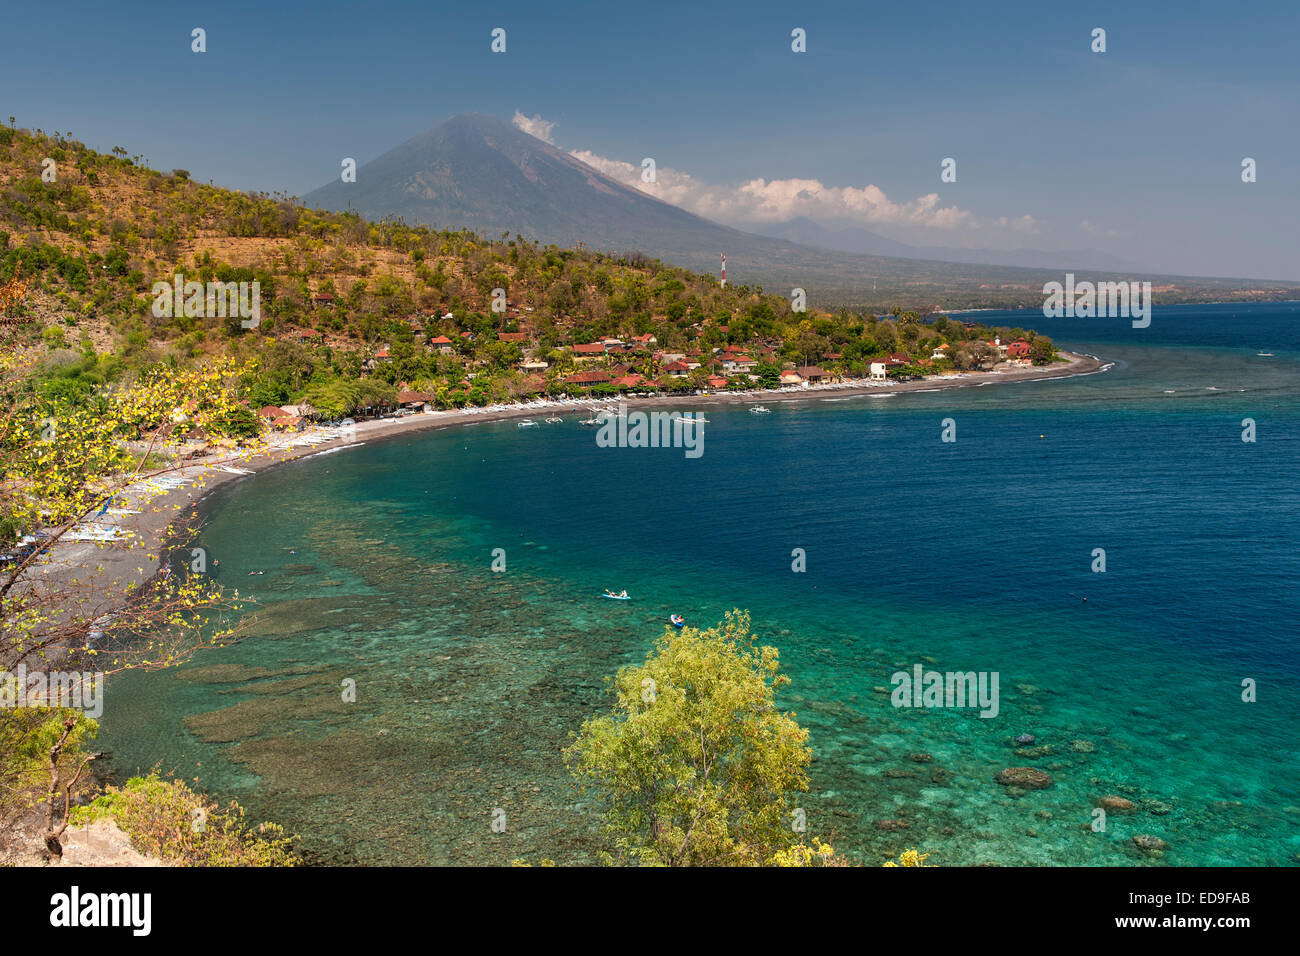 View of Mount Agung (3031m) and Jemulek beach & hamlet near Amed on the northeastern coast of Bali, Indonesia. Stock Photo